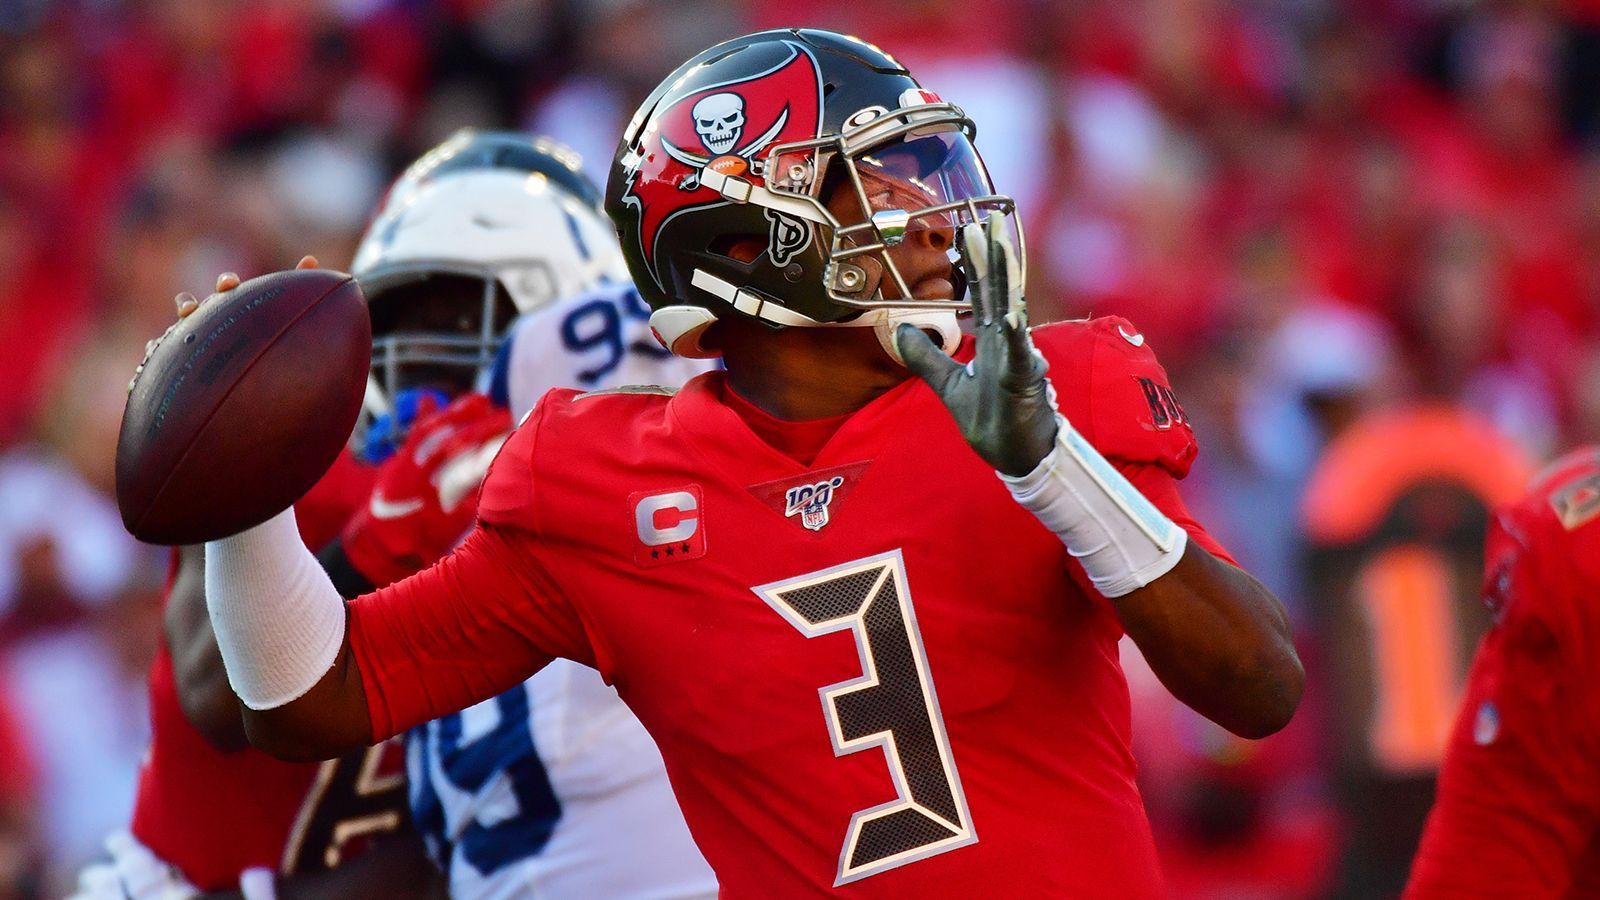 
                <strong>Tampa Bay Buccaneers</strong><br>
                Ausgeschieden nach Woche 14AFC South:1. New Orleans Saints (10-3) 2. Tampa Bay Buccaneers (6-7) 3. Carolina Panthers (5-8)4. Atlanta Falcons (4-9)
              